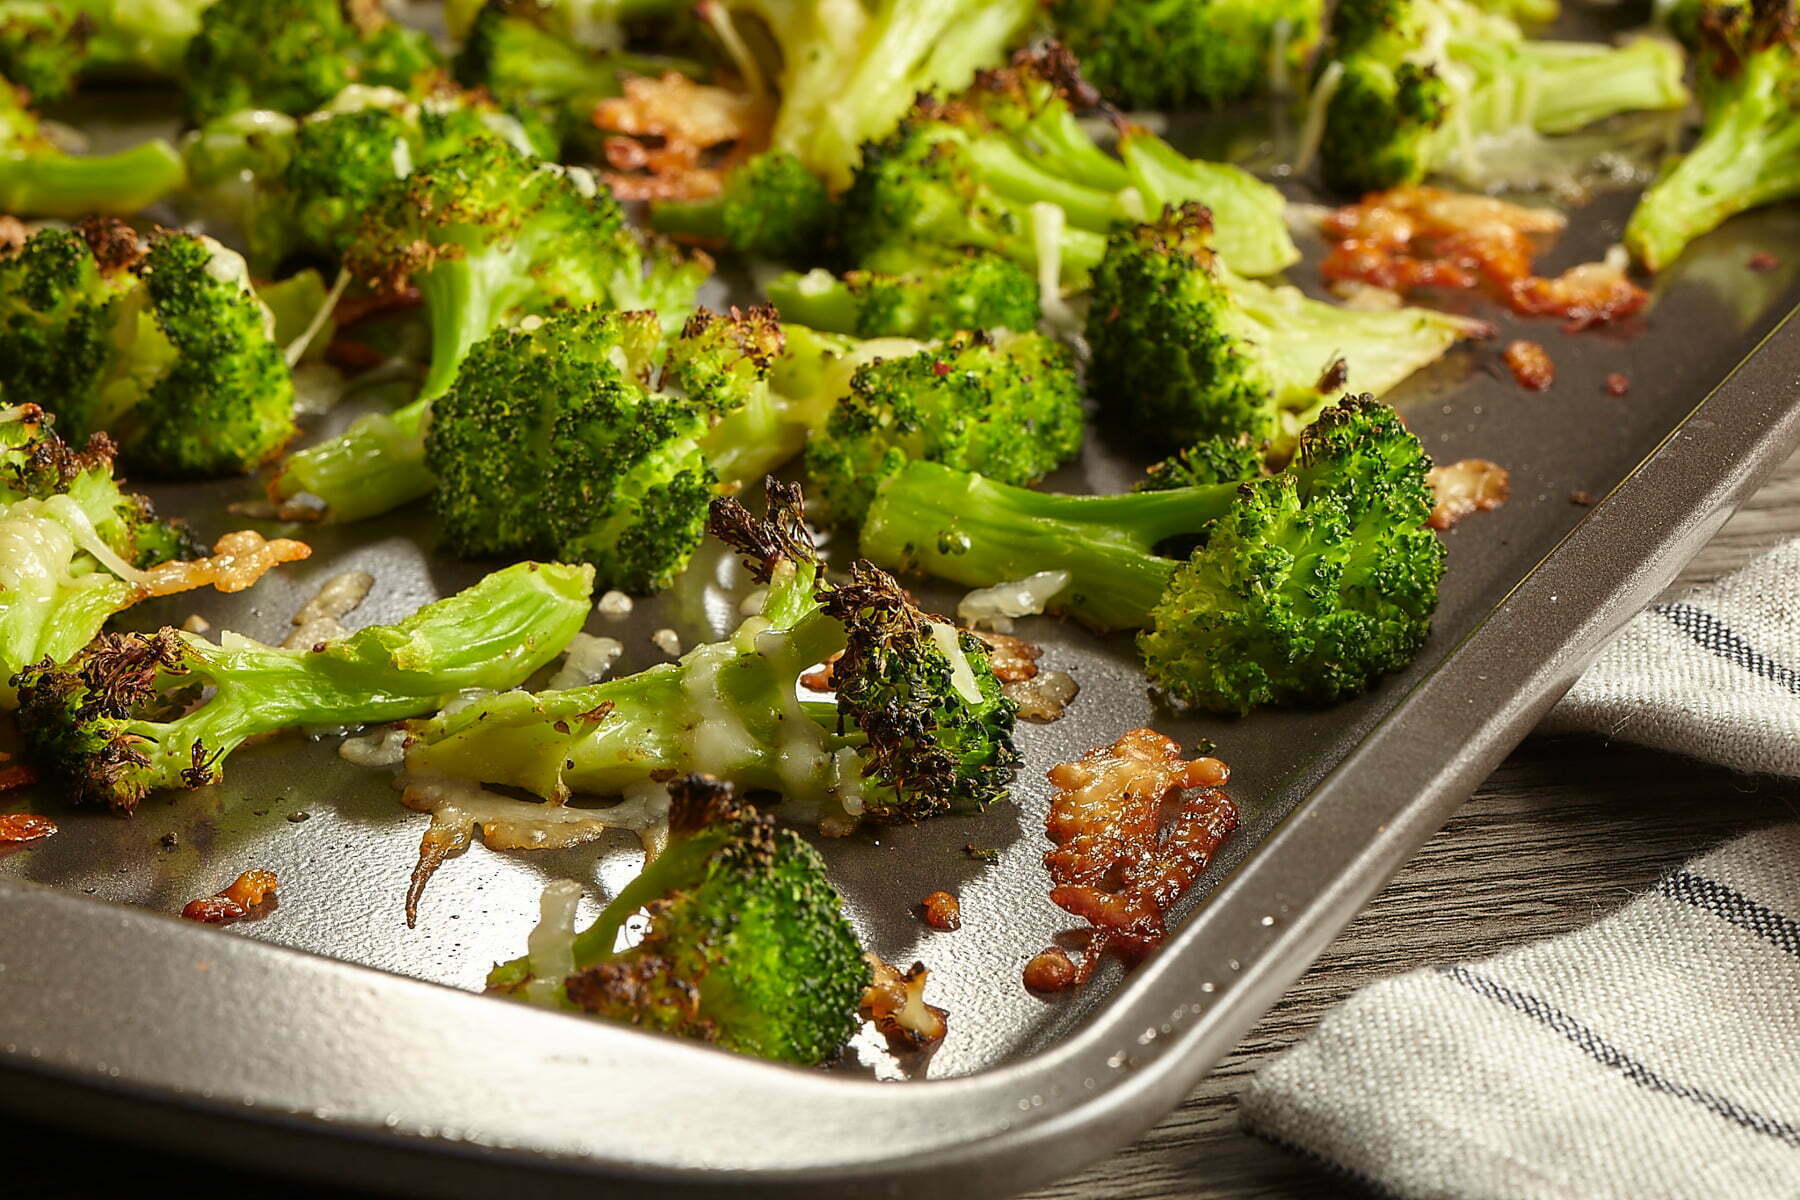 RoastedBroccoliWithParmesanCheese_2550